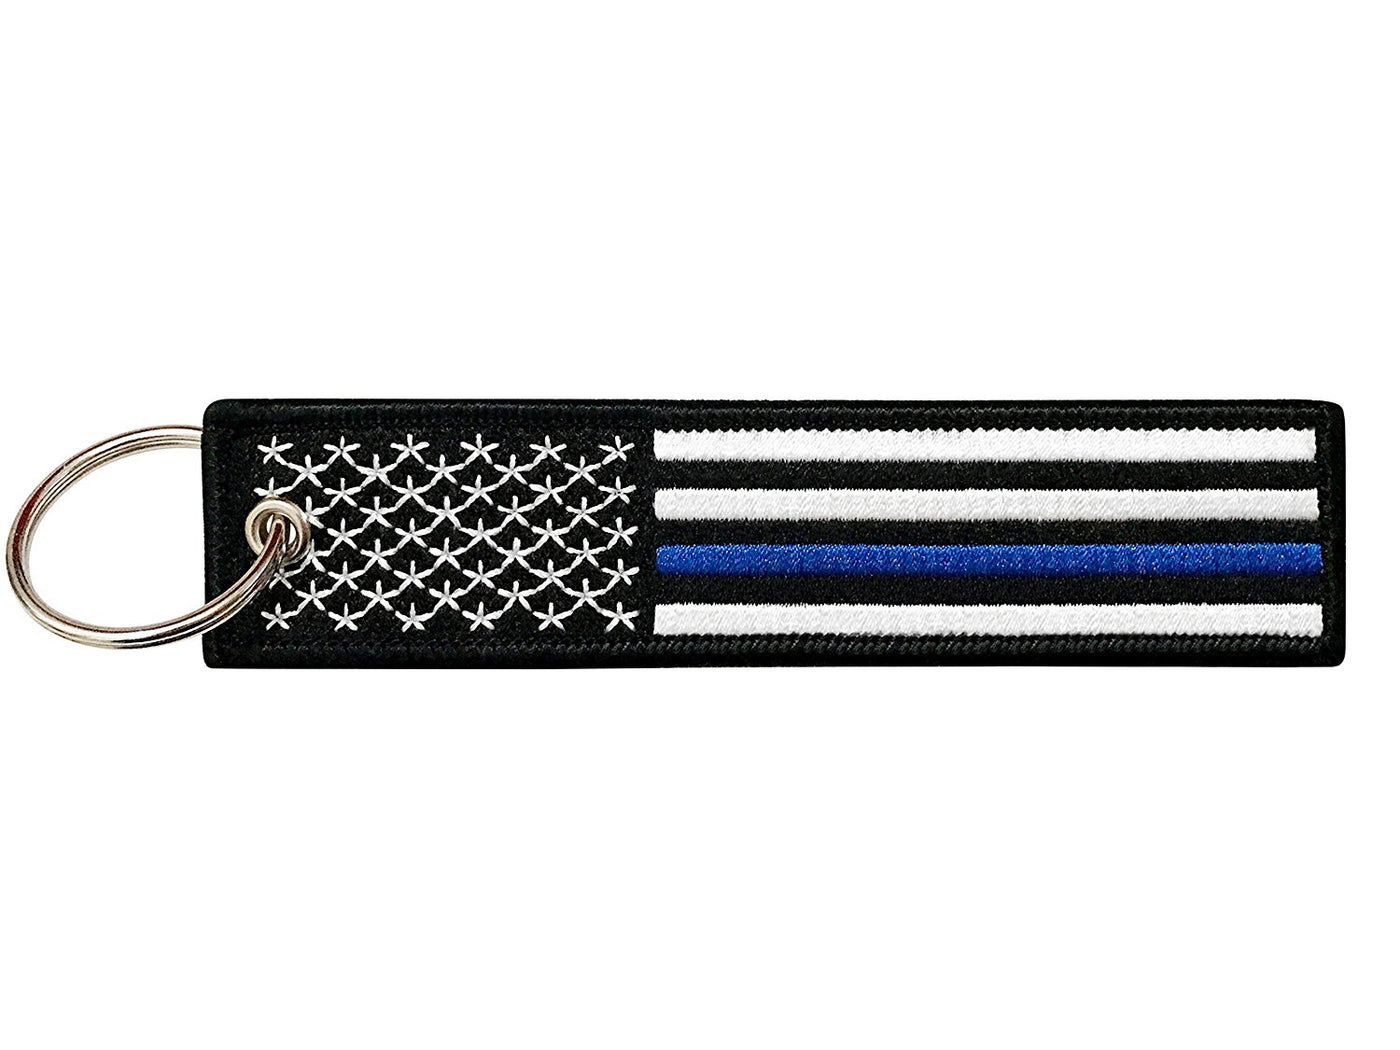 Flag Keychain Tag with Key Ring, EDC for Motorcycles, Scooters, Cars and Gifts (USA Thin Blue Line)